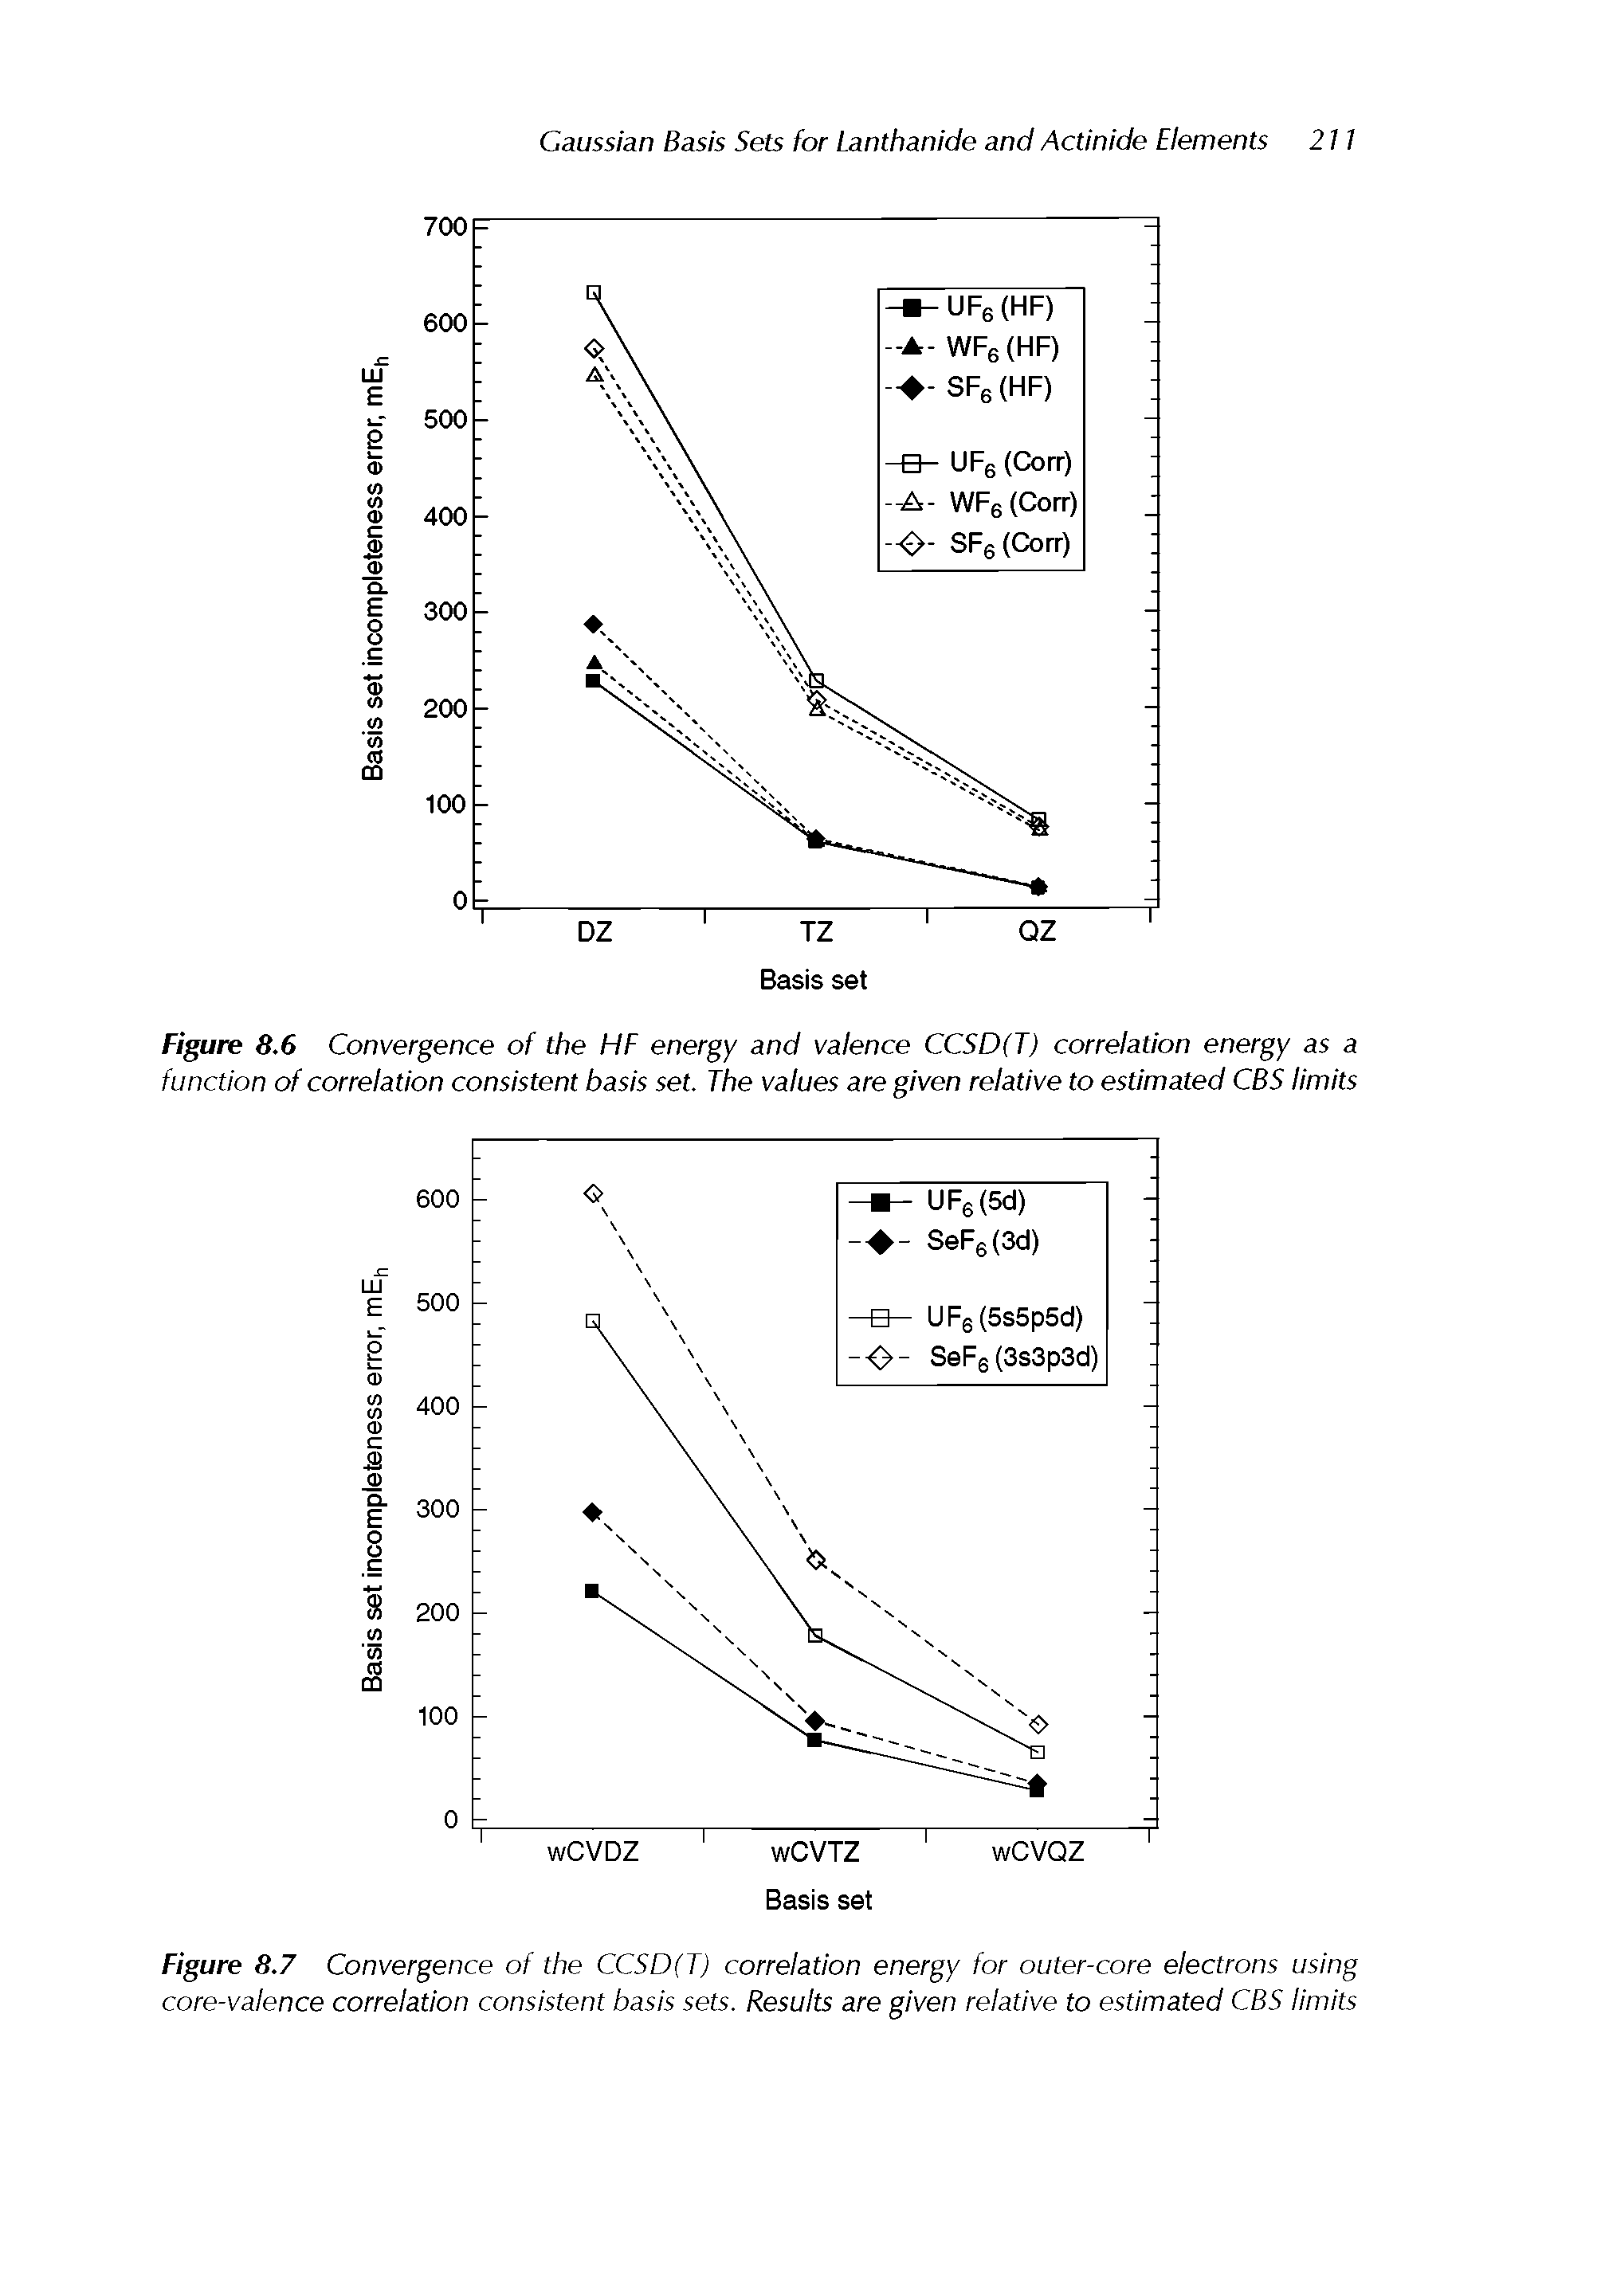 Figure 8.7 Convergence of the CCSD(T) correlation energy for outer-core electrons using core-valence correlation consistent basis sets. Results are given relative to estimated CBS limits...